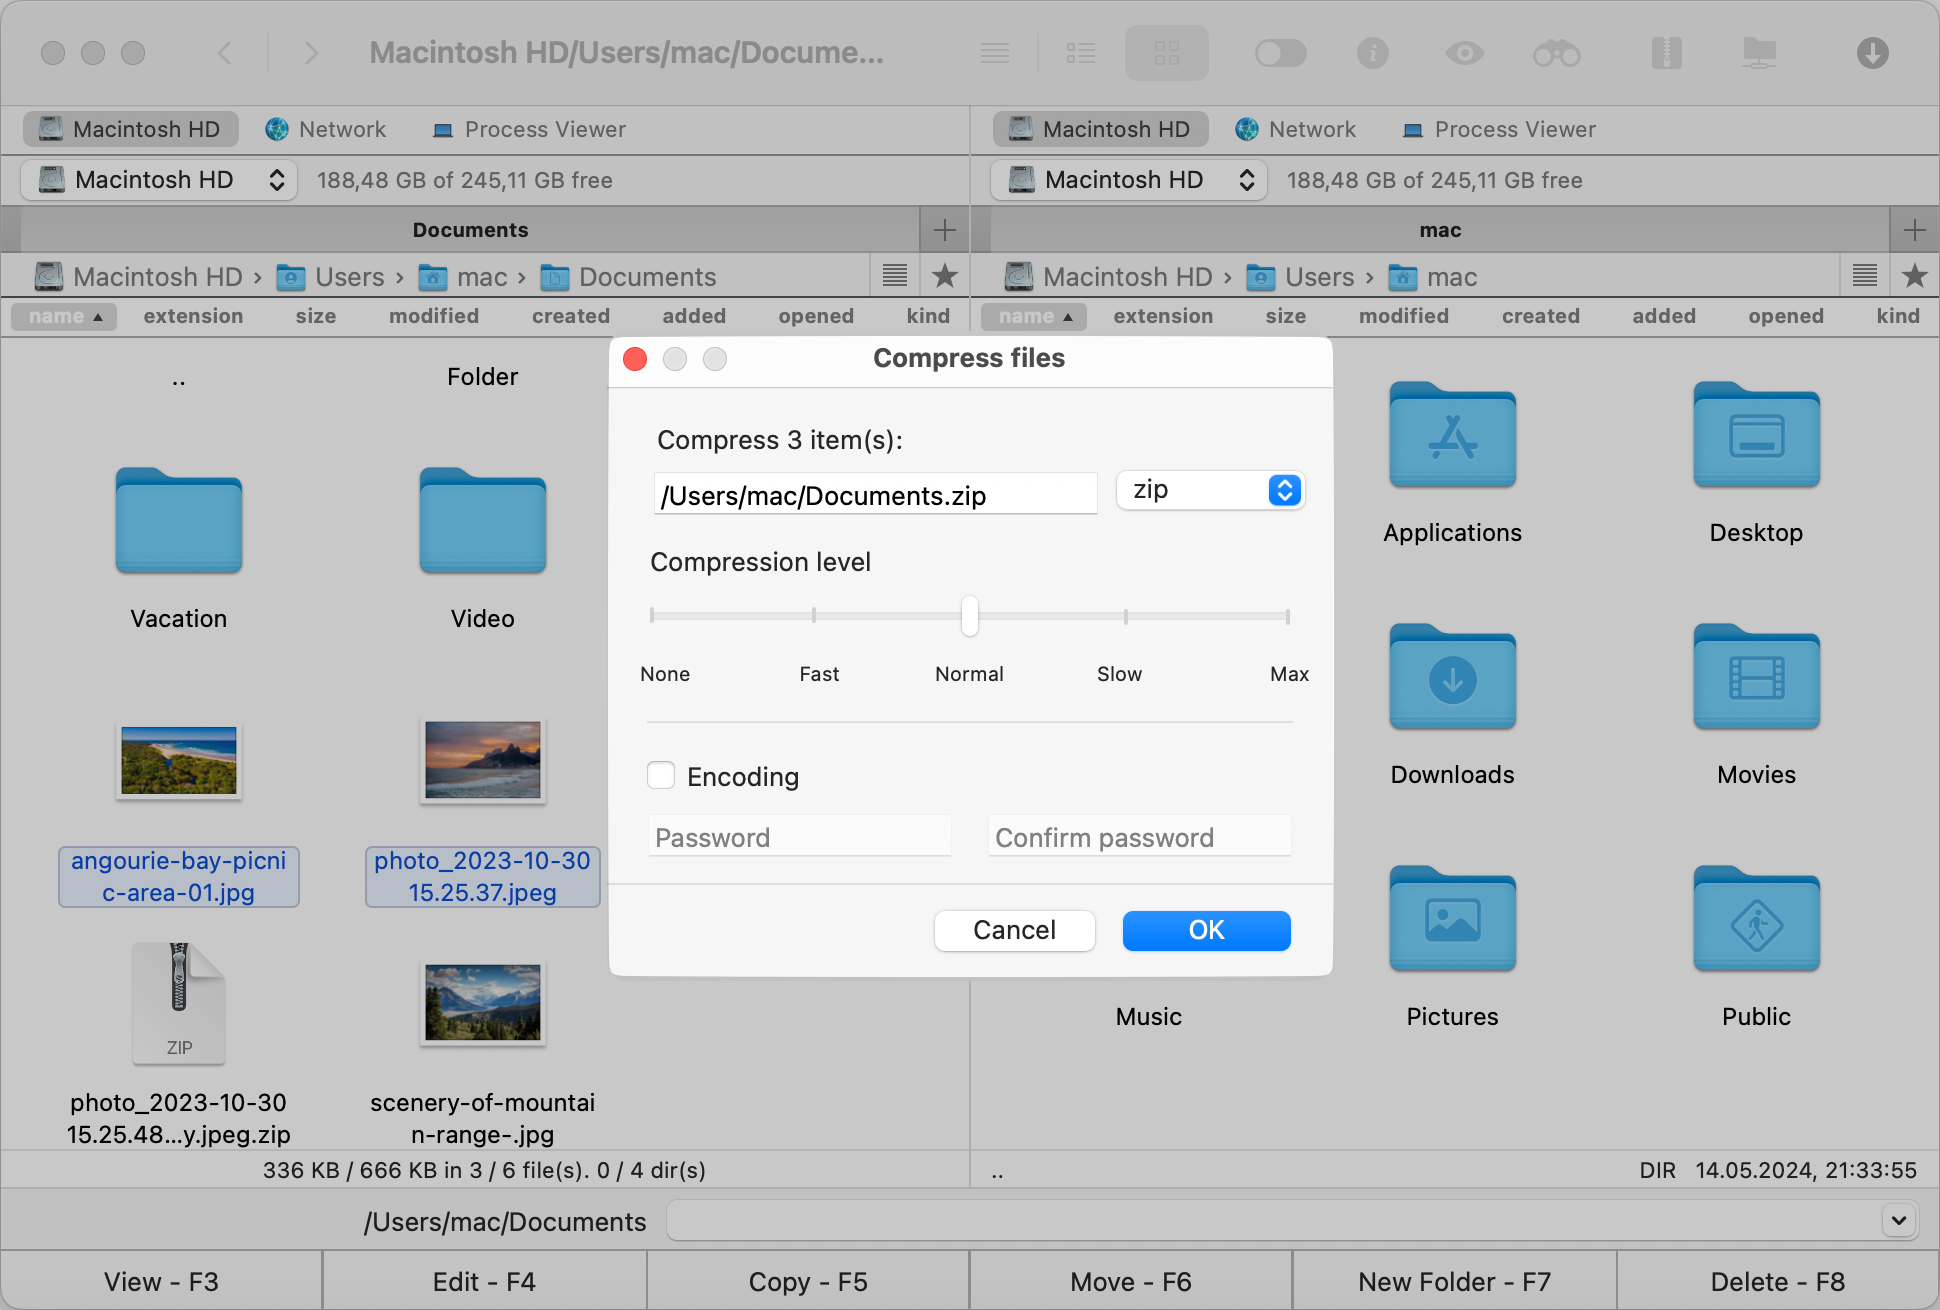 The "Compress files" pop-up window is demonstrated